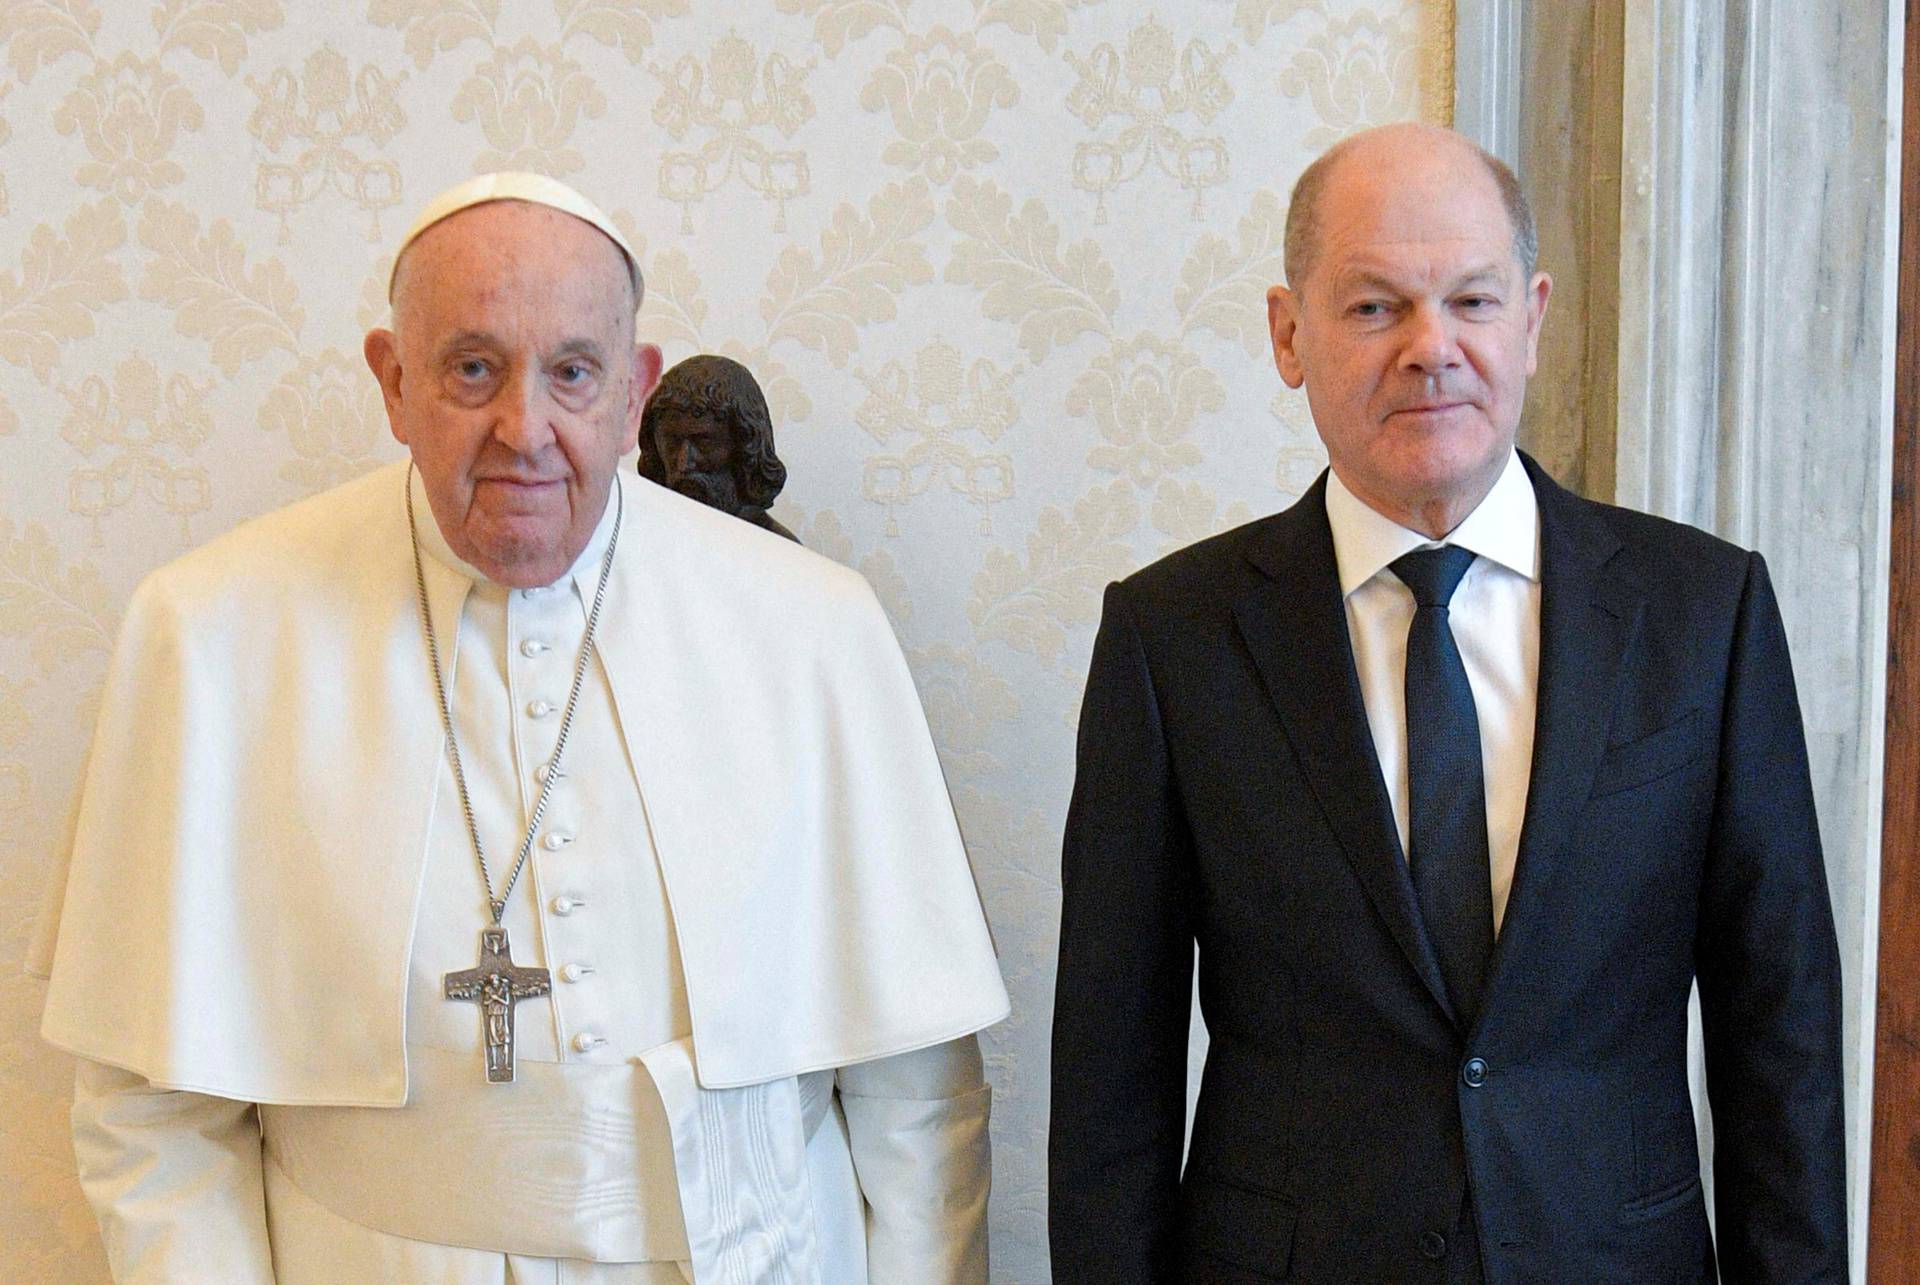 FILE PHOTO: Pope Francis meets with German Chancellor Scholz at the Vatican